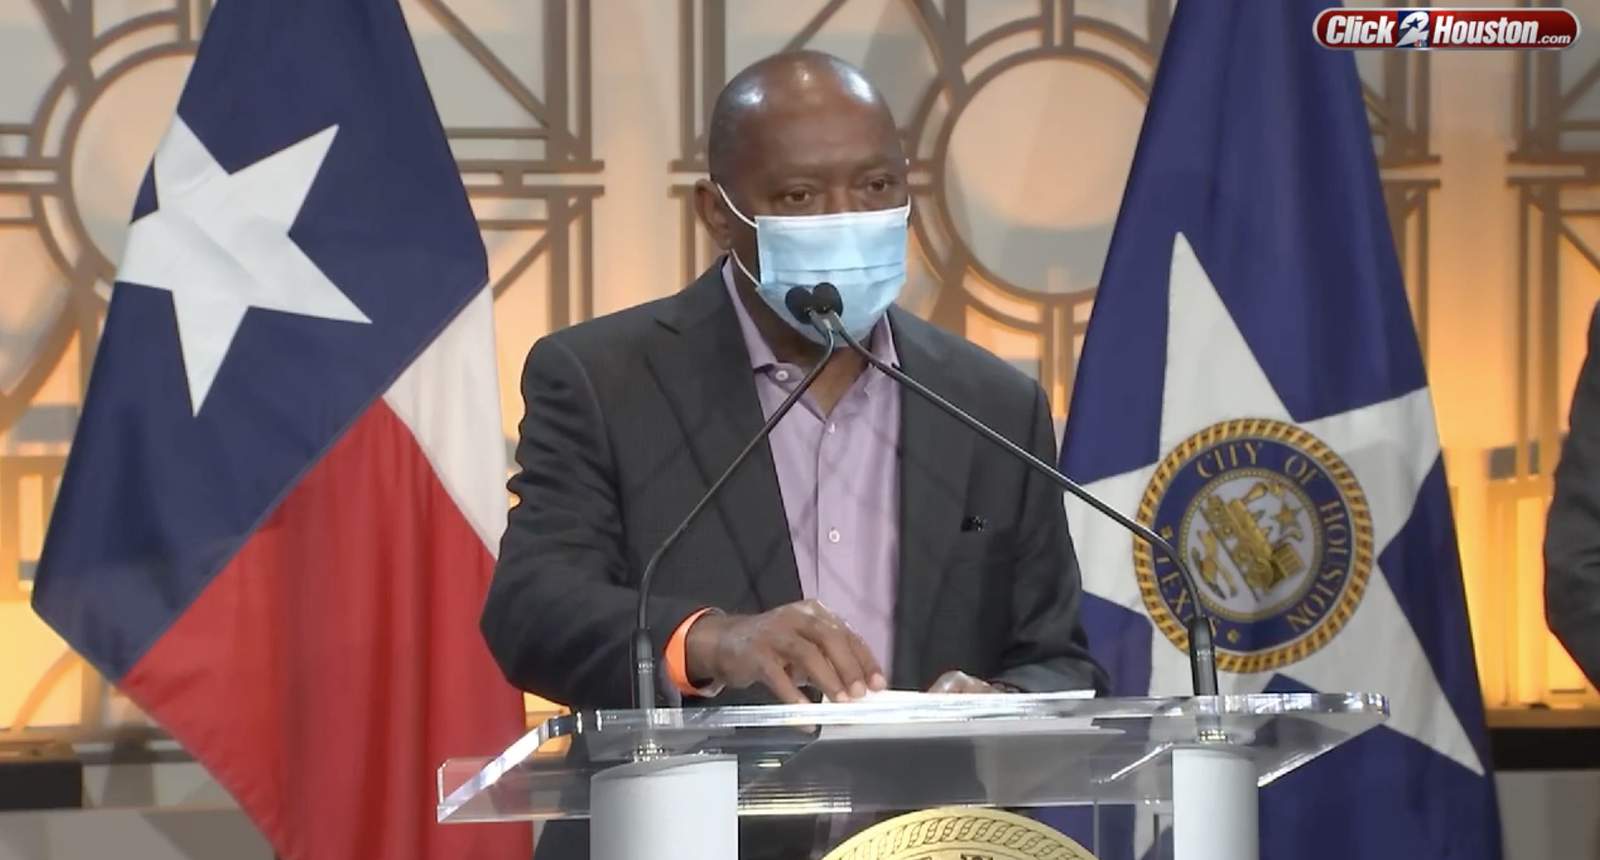 Mayor Turner to announce launch of program designed to protect restaurant-goers during COVID-19 pandemic